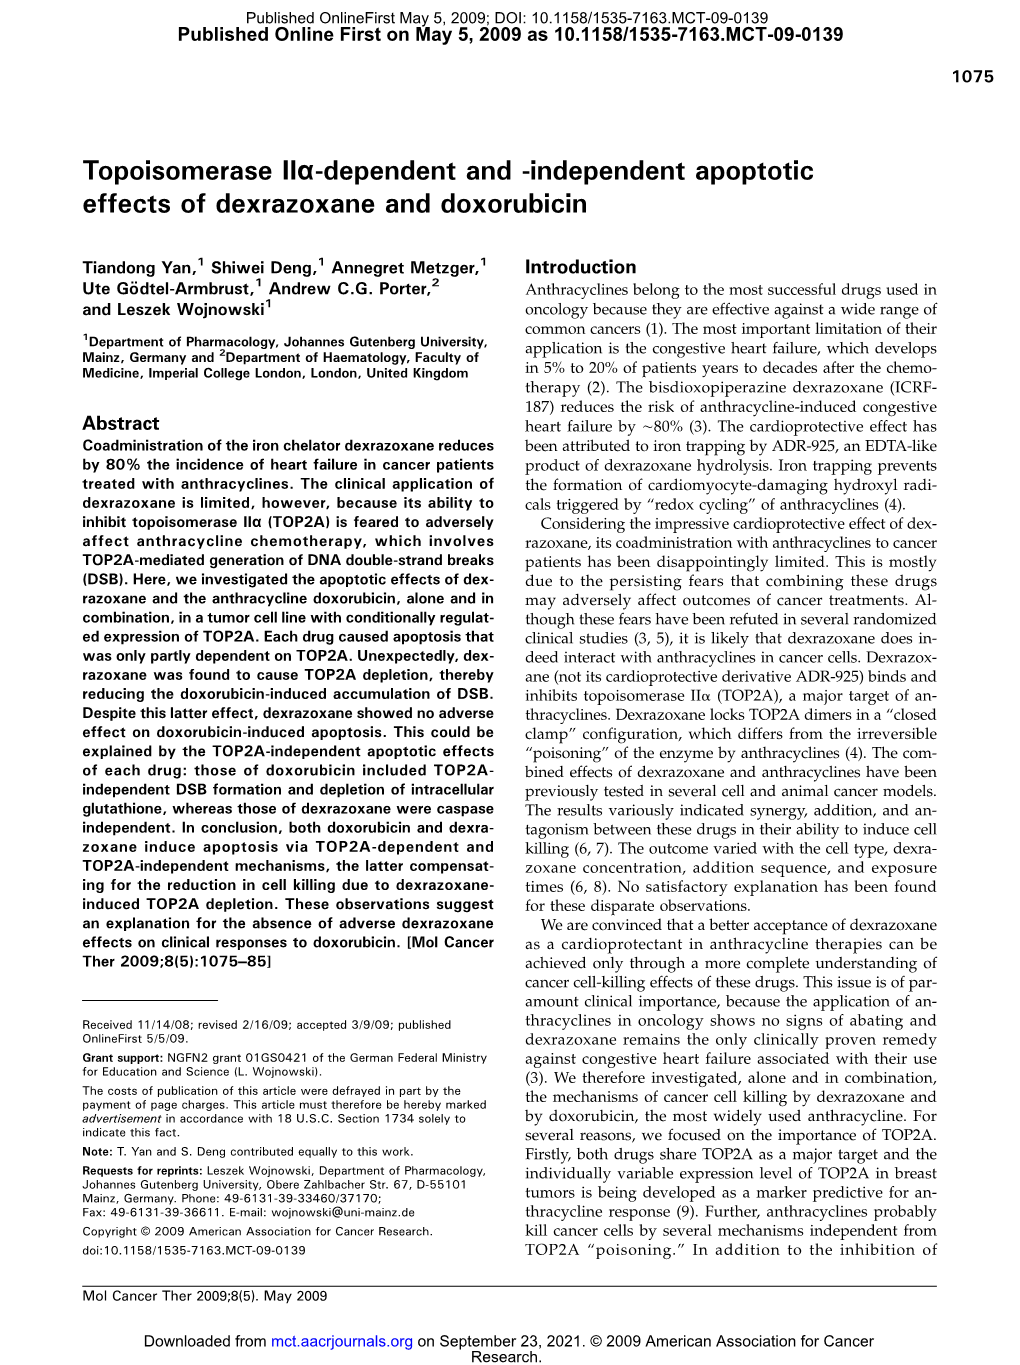 Topoisomerase Iiα-Dependent and -Independent Apoptotic Effects of Dexrazoxane and Doxorubicin